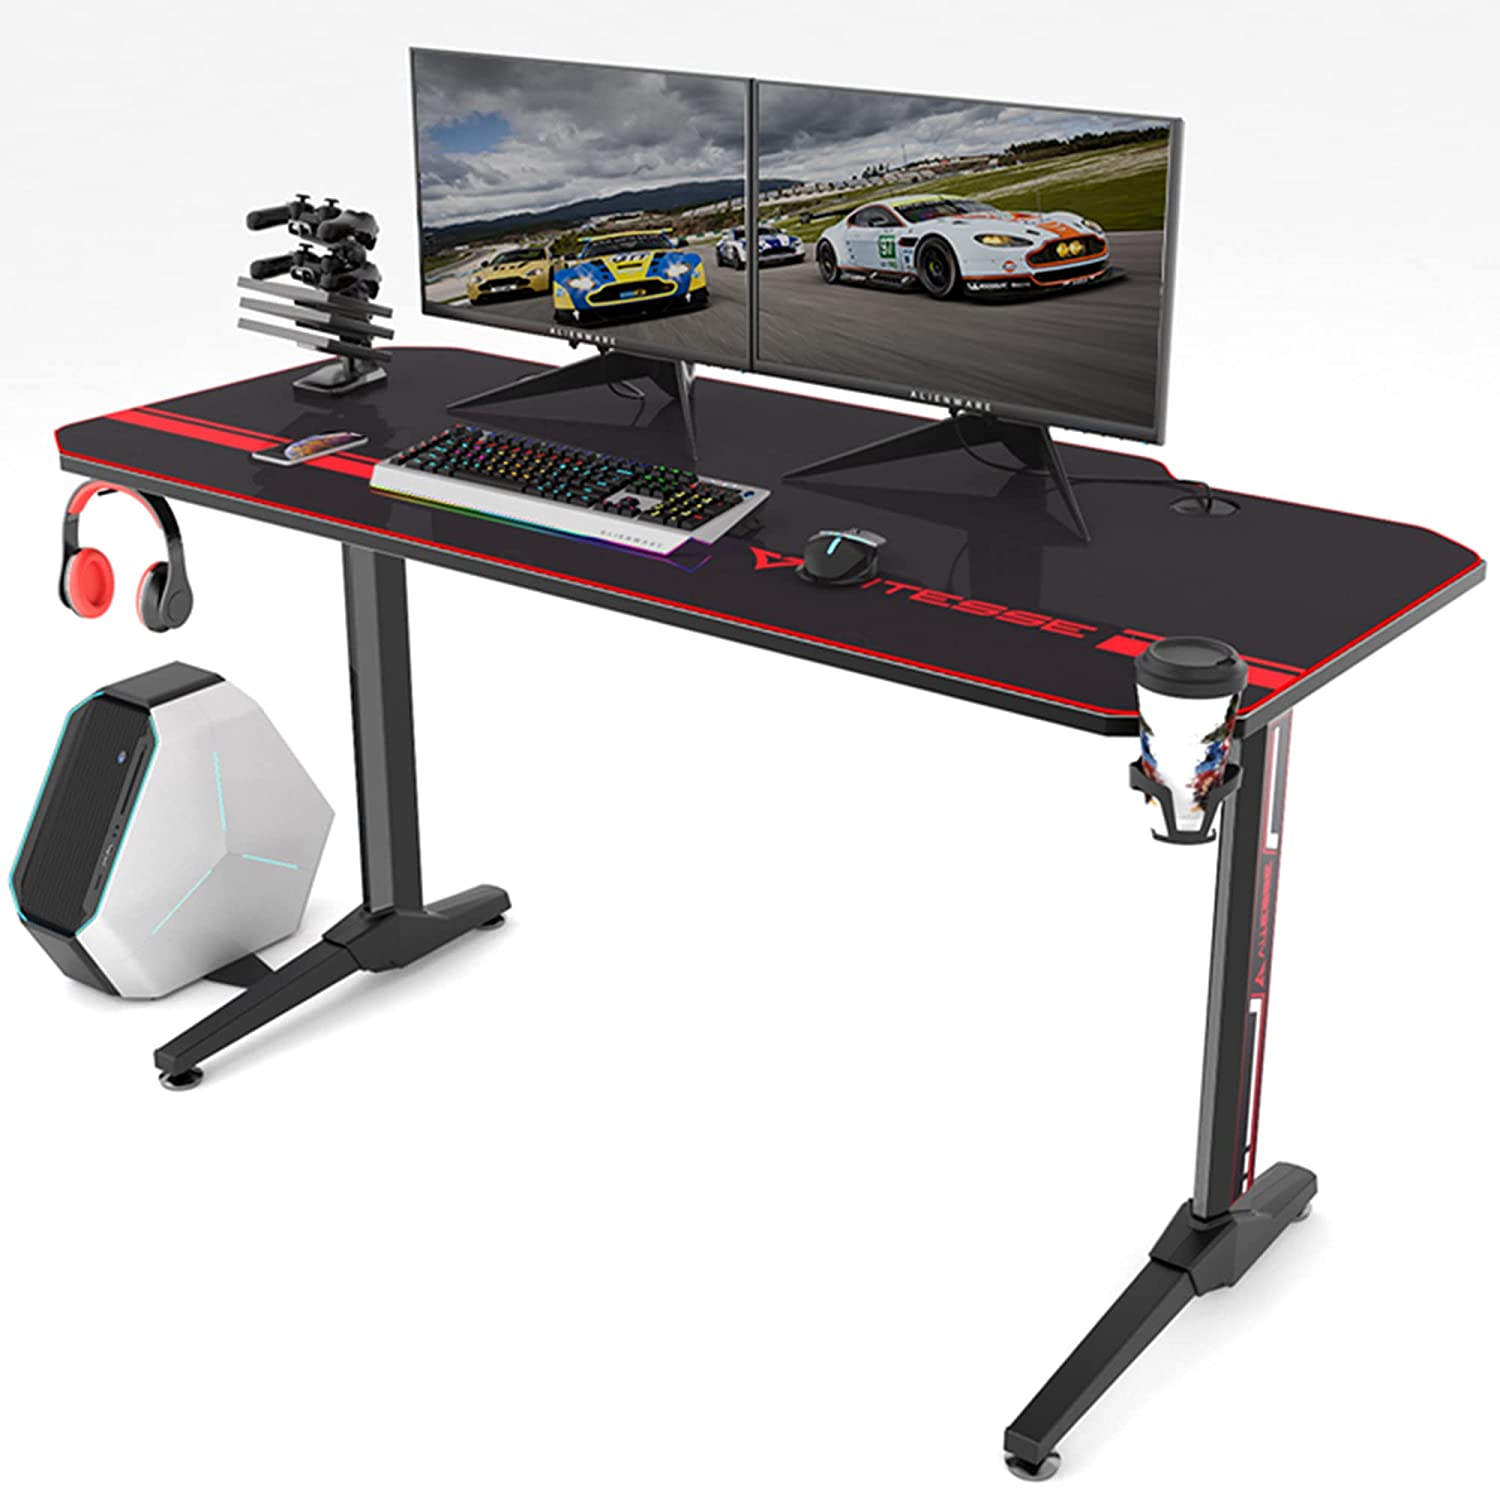 Vitesse Gaming Table- 55 Inches with Free Mouse pad, Gamer Game Station with USB Gaming Handle Rack, Cup Holder & Headphone Hook